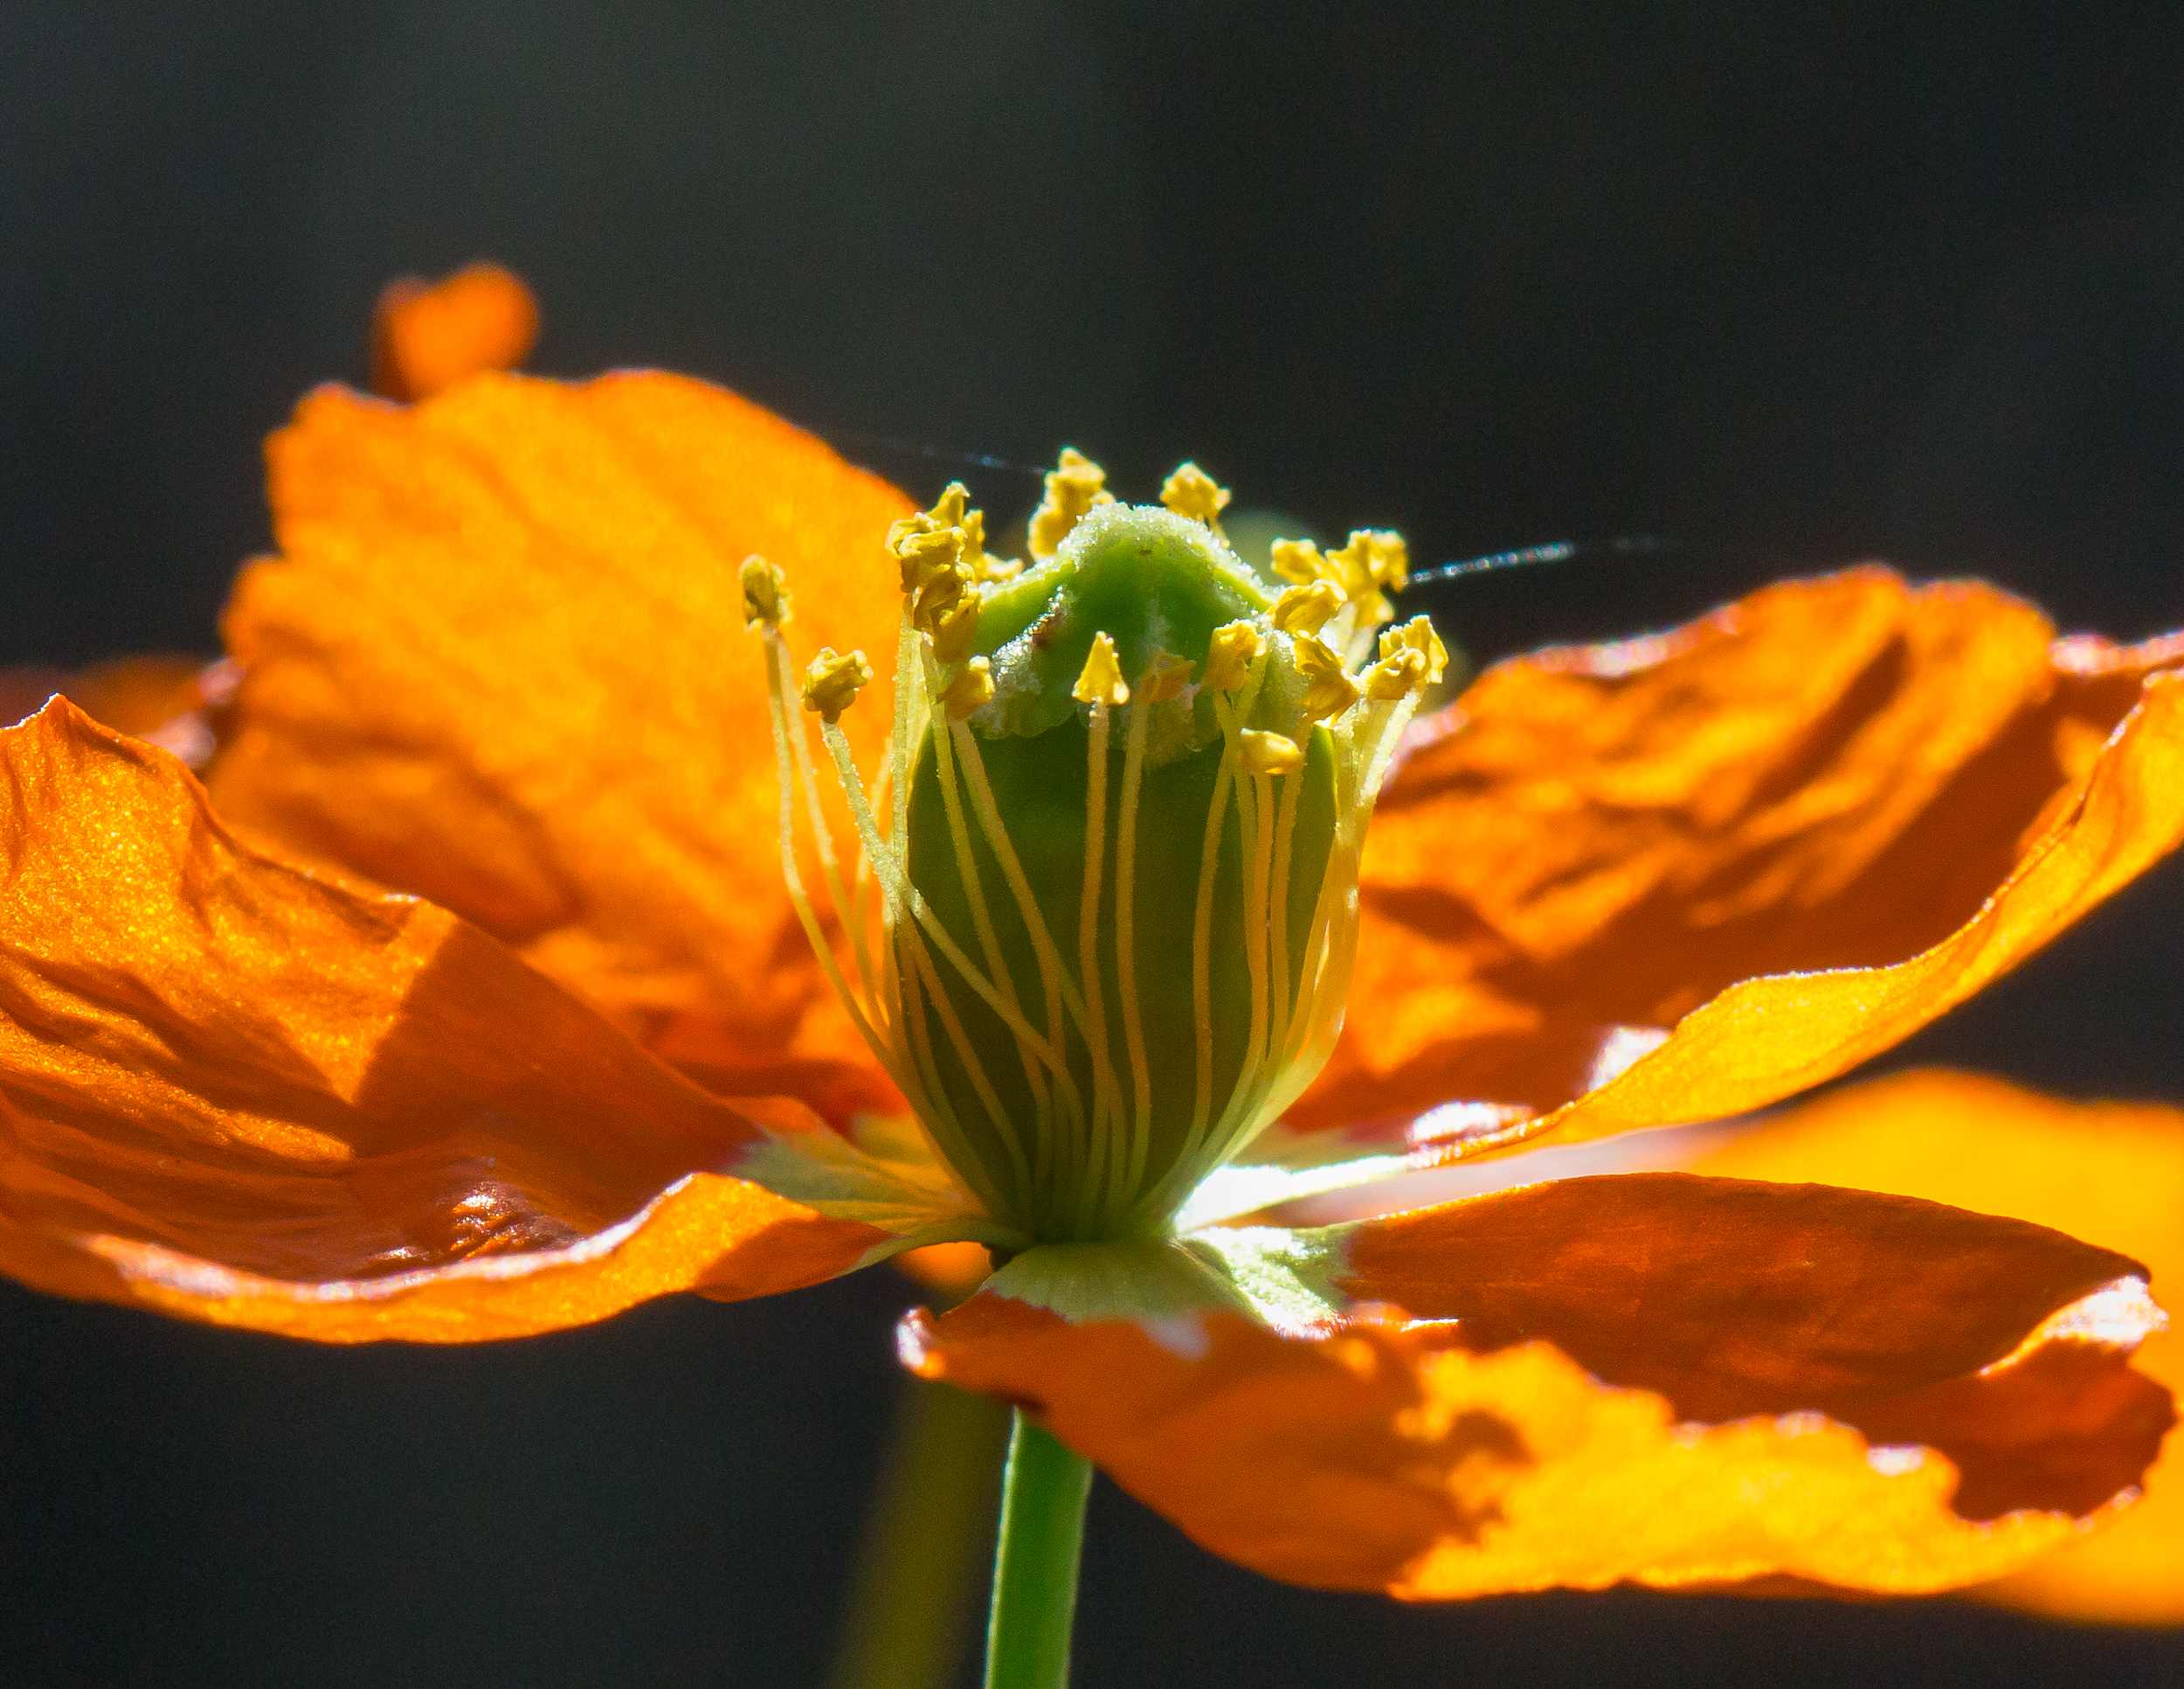 Bright orange petals and green bud of a fire poppy papaver on a black background.